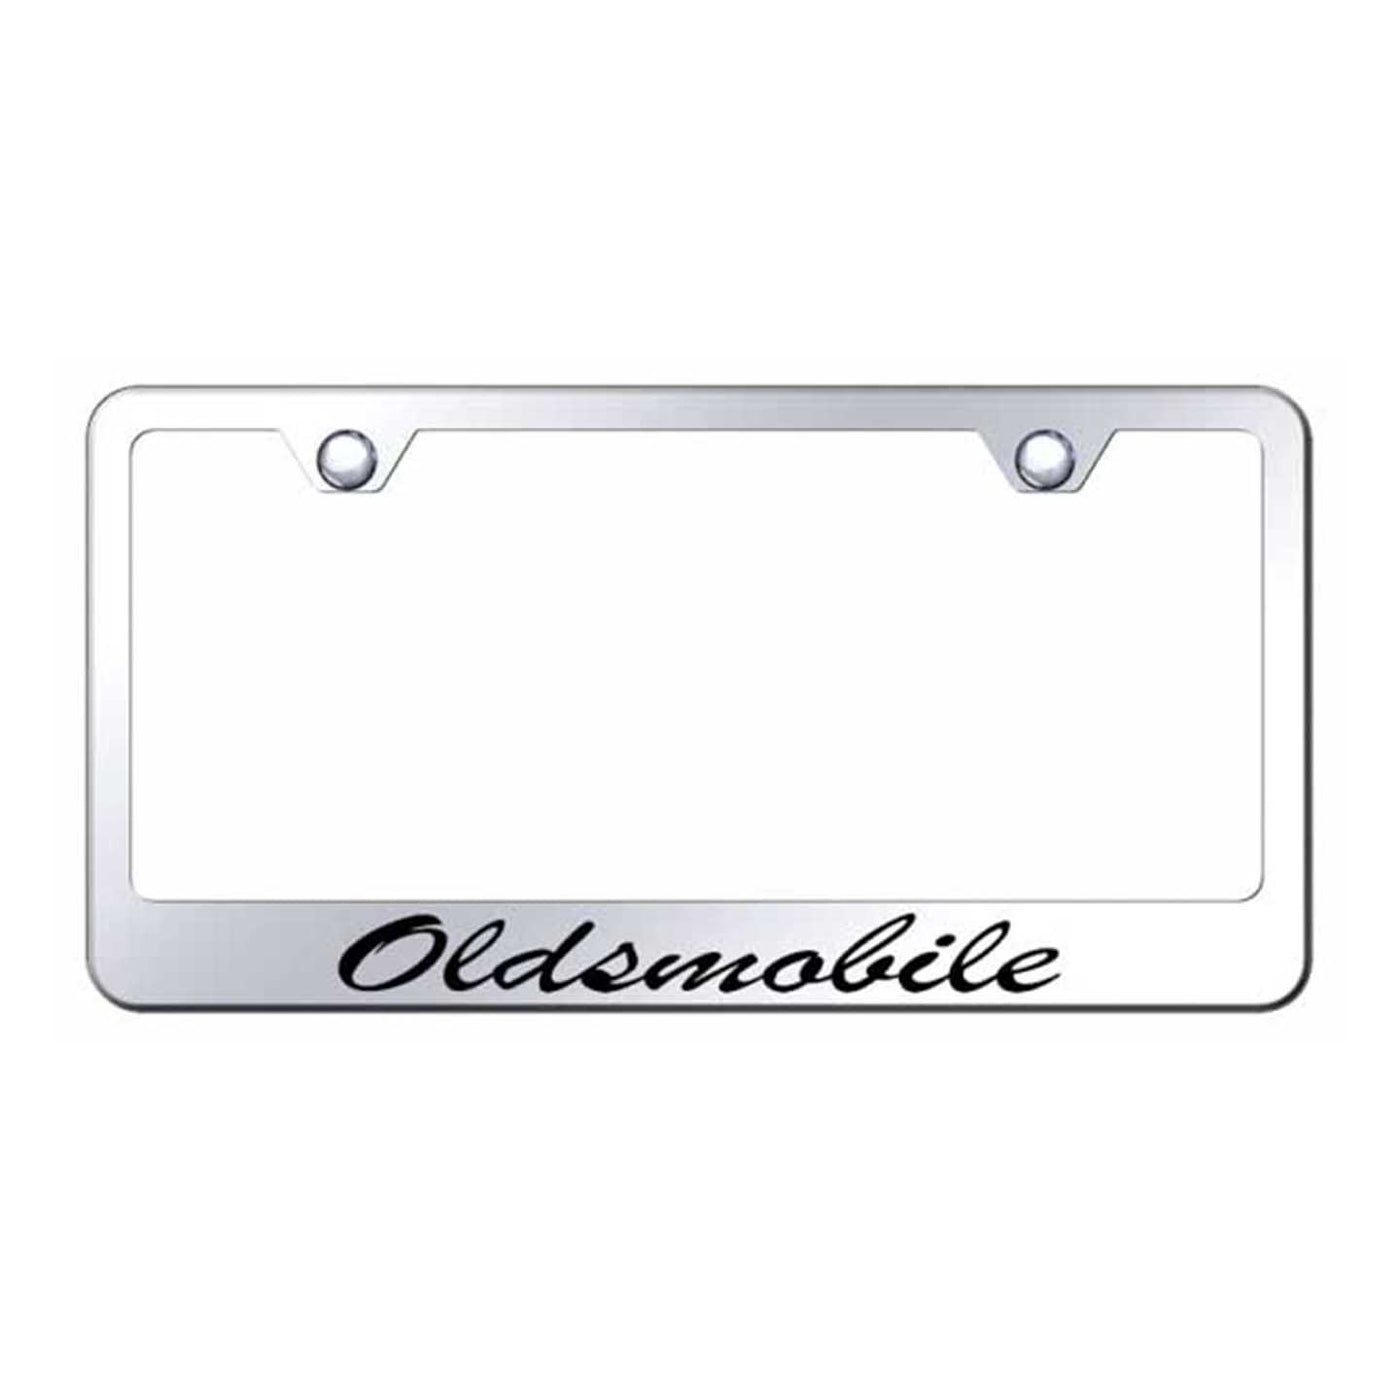 Oldsmobile Script Stainless Steel Frame - Etched Mirrored